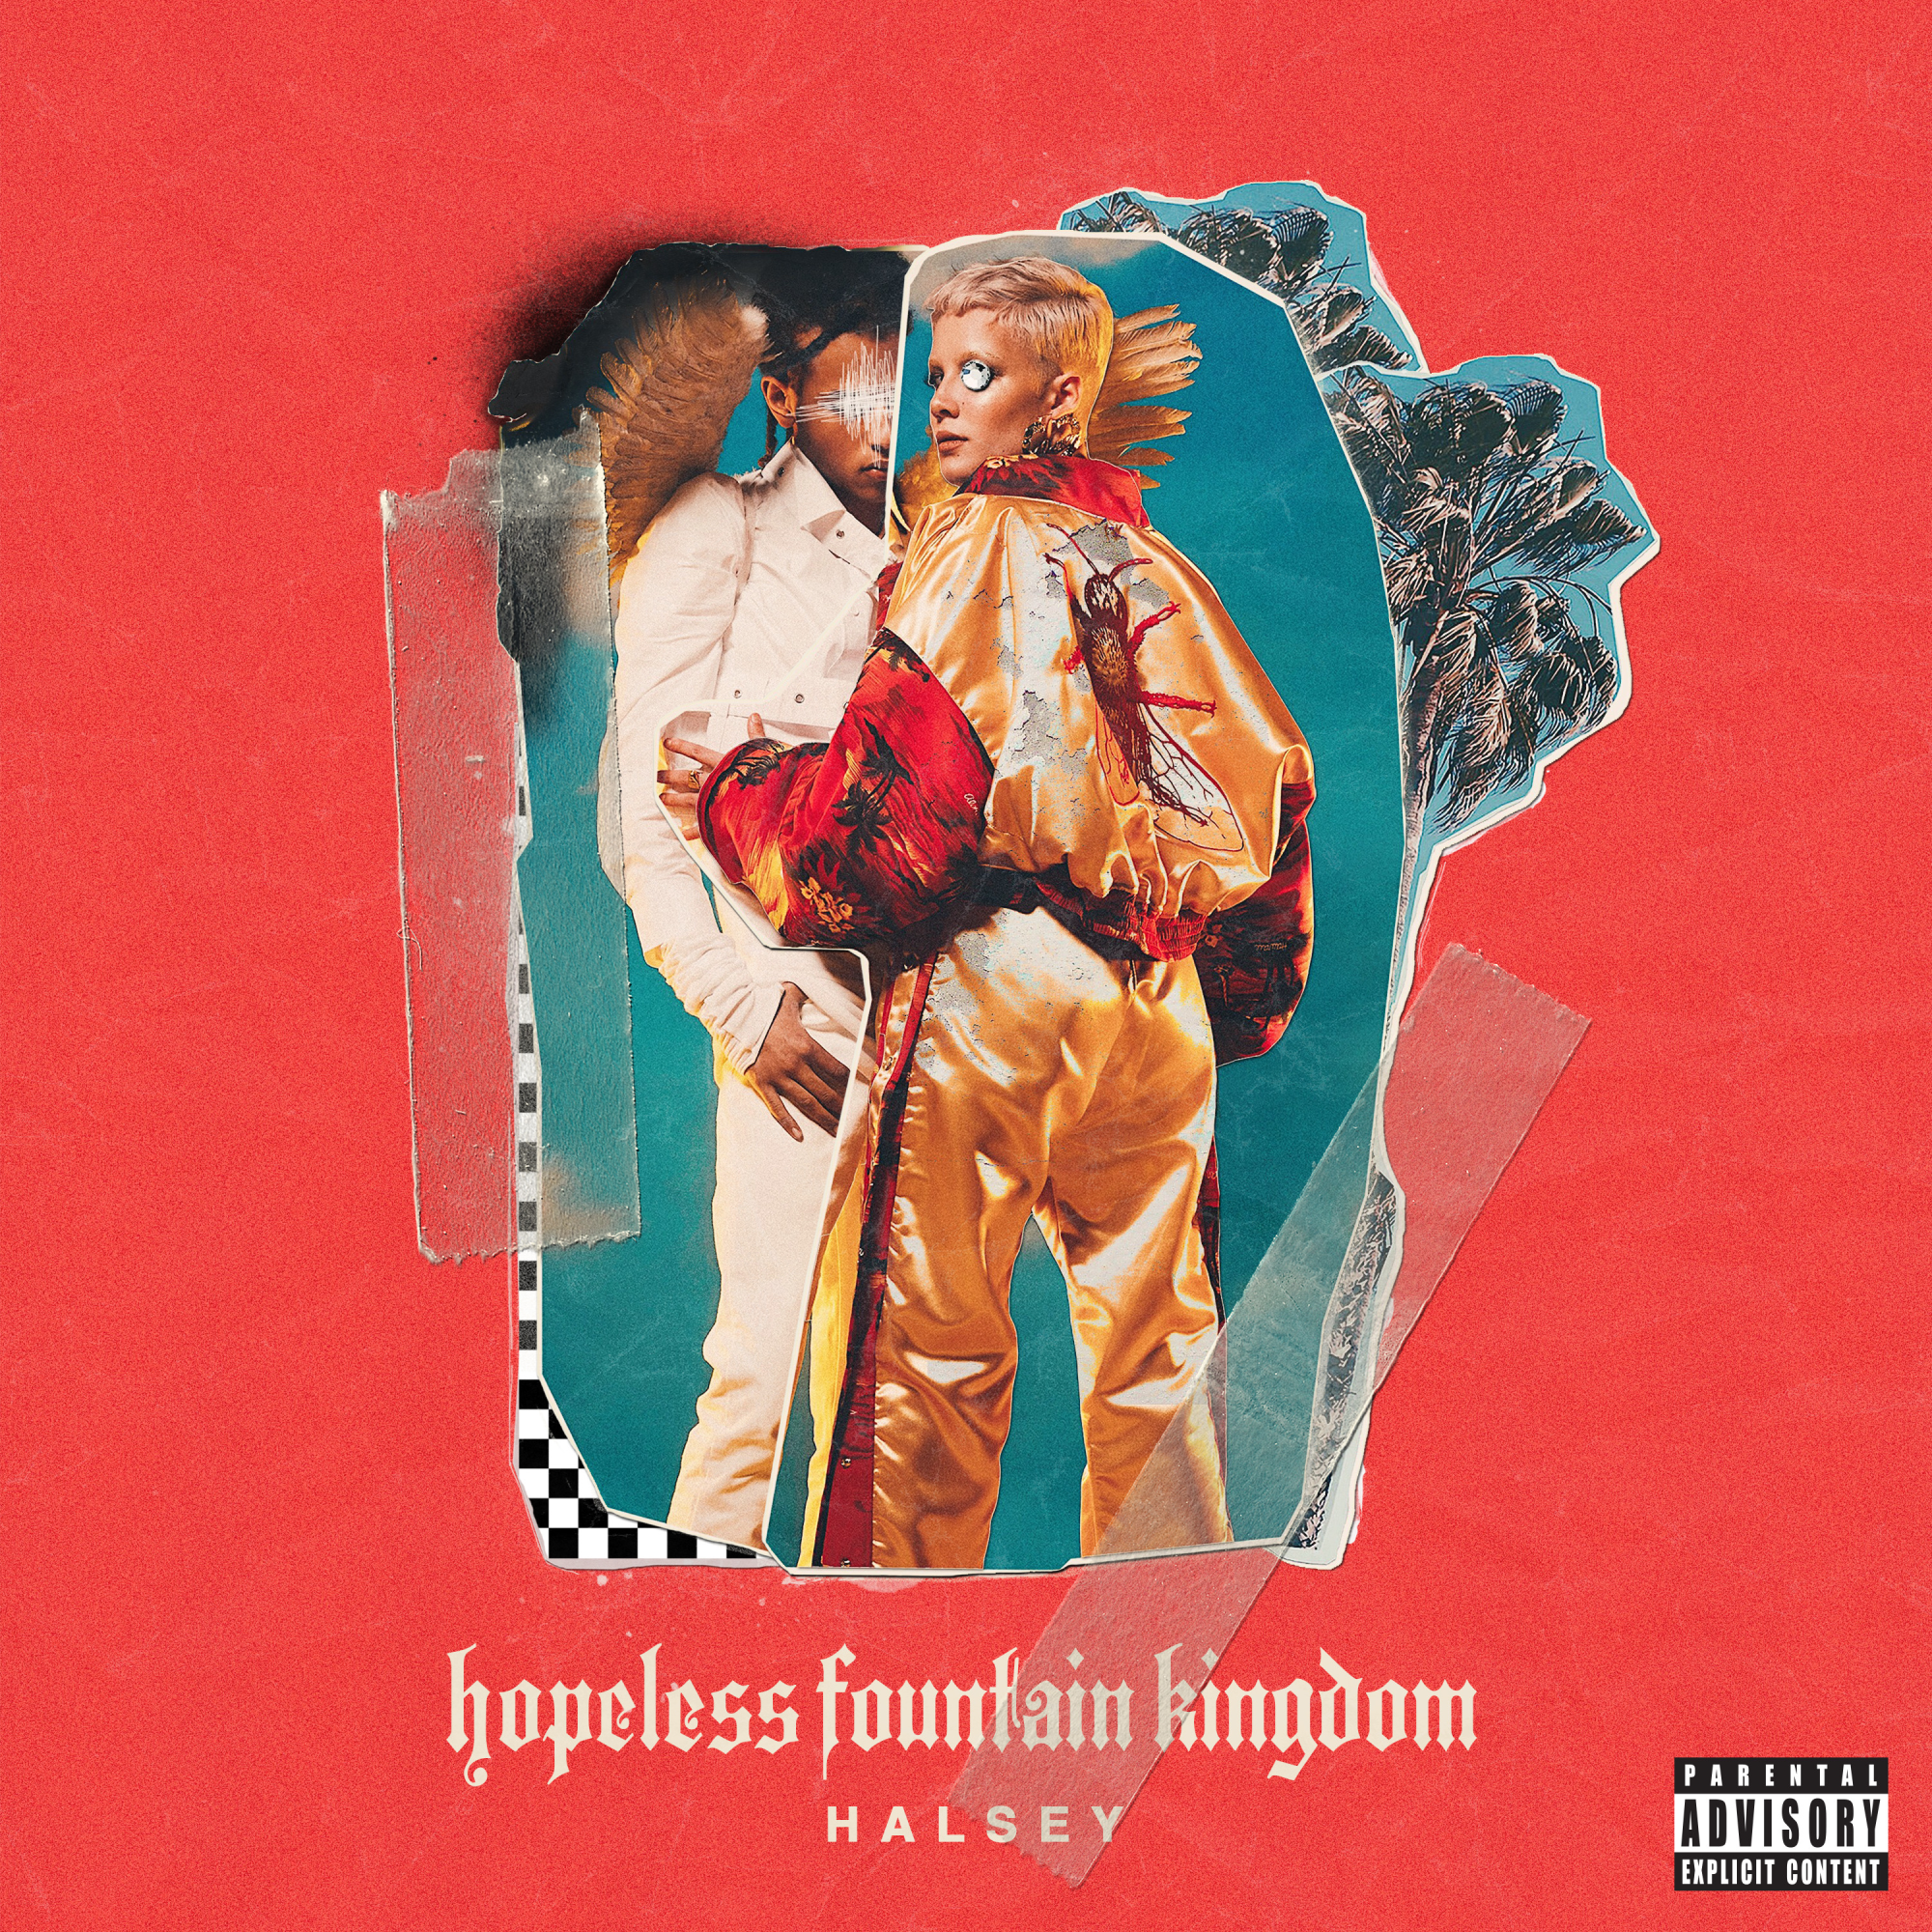 The album cover for Halsey's "Hopeless Fountain Kingdom" which is based around the romantic tragedy, Romeo and Juliet.